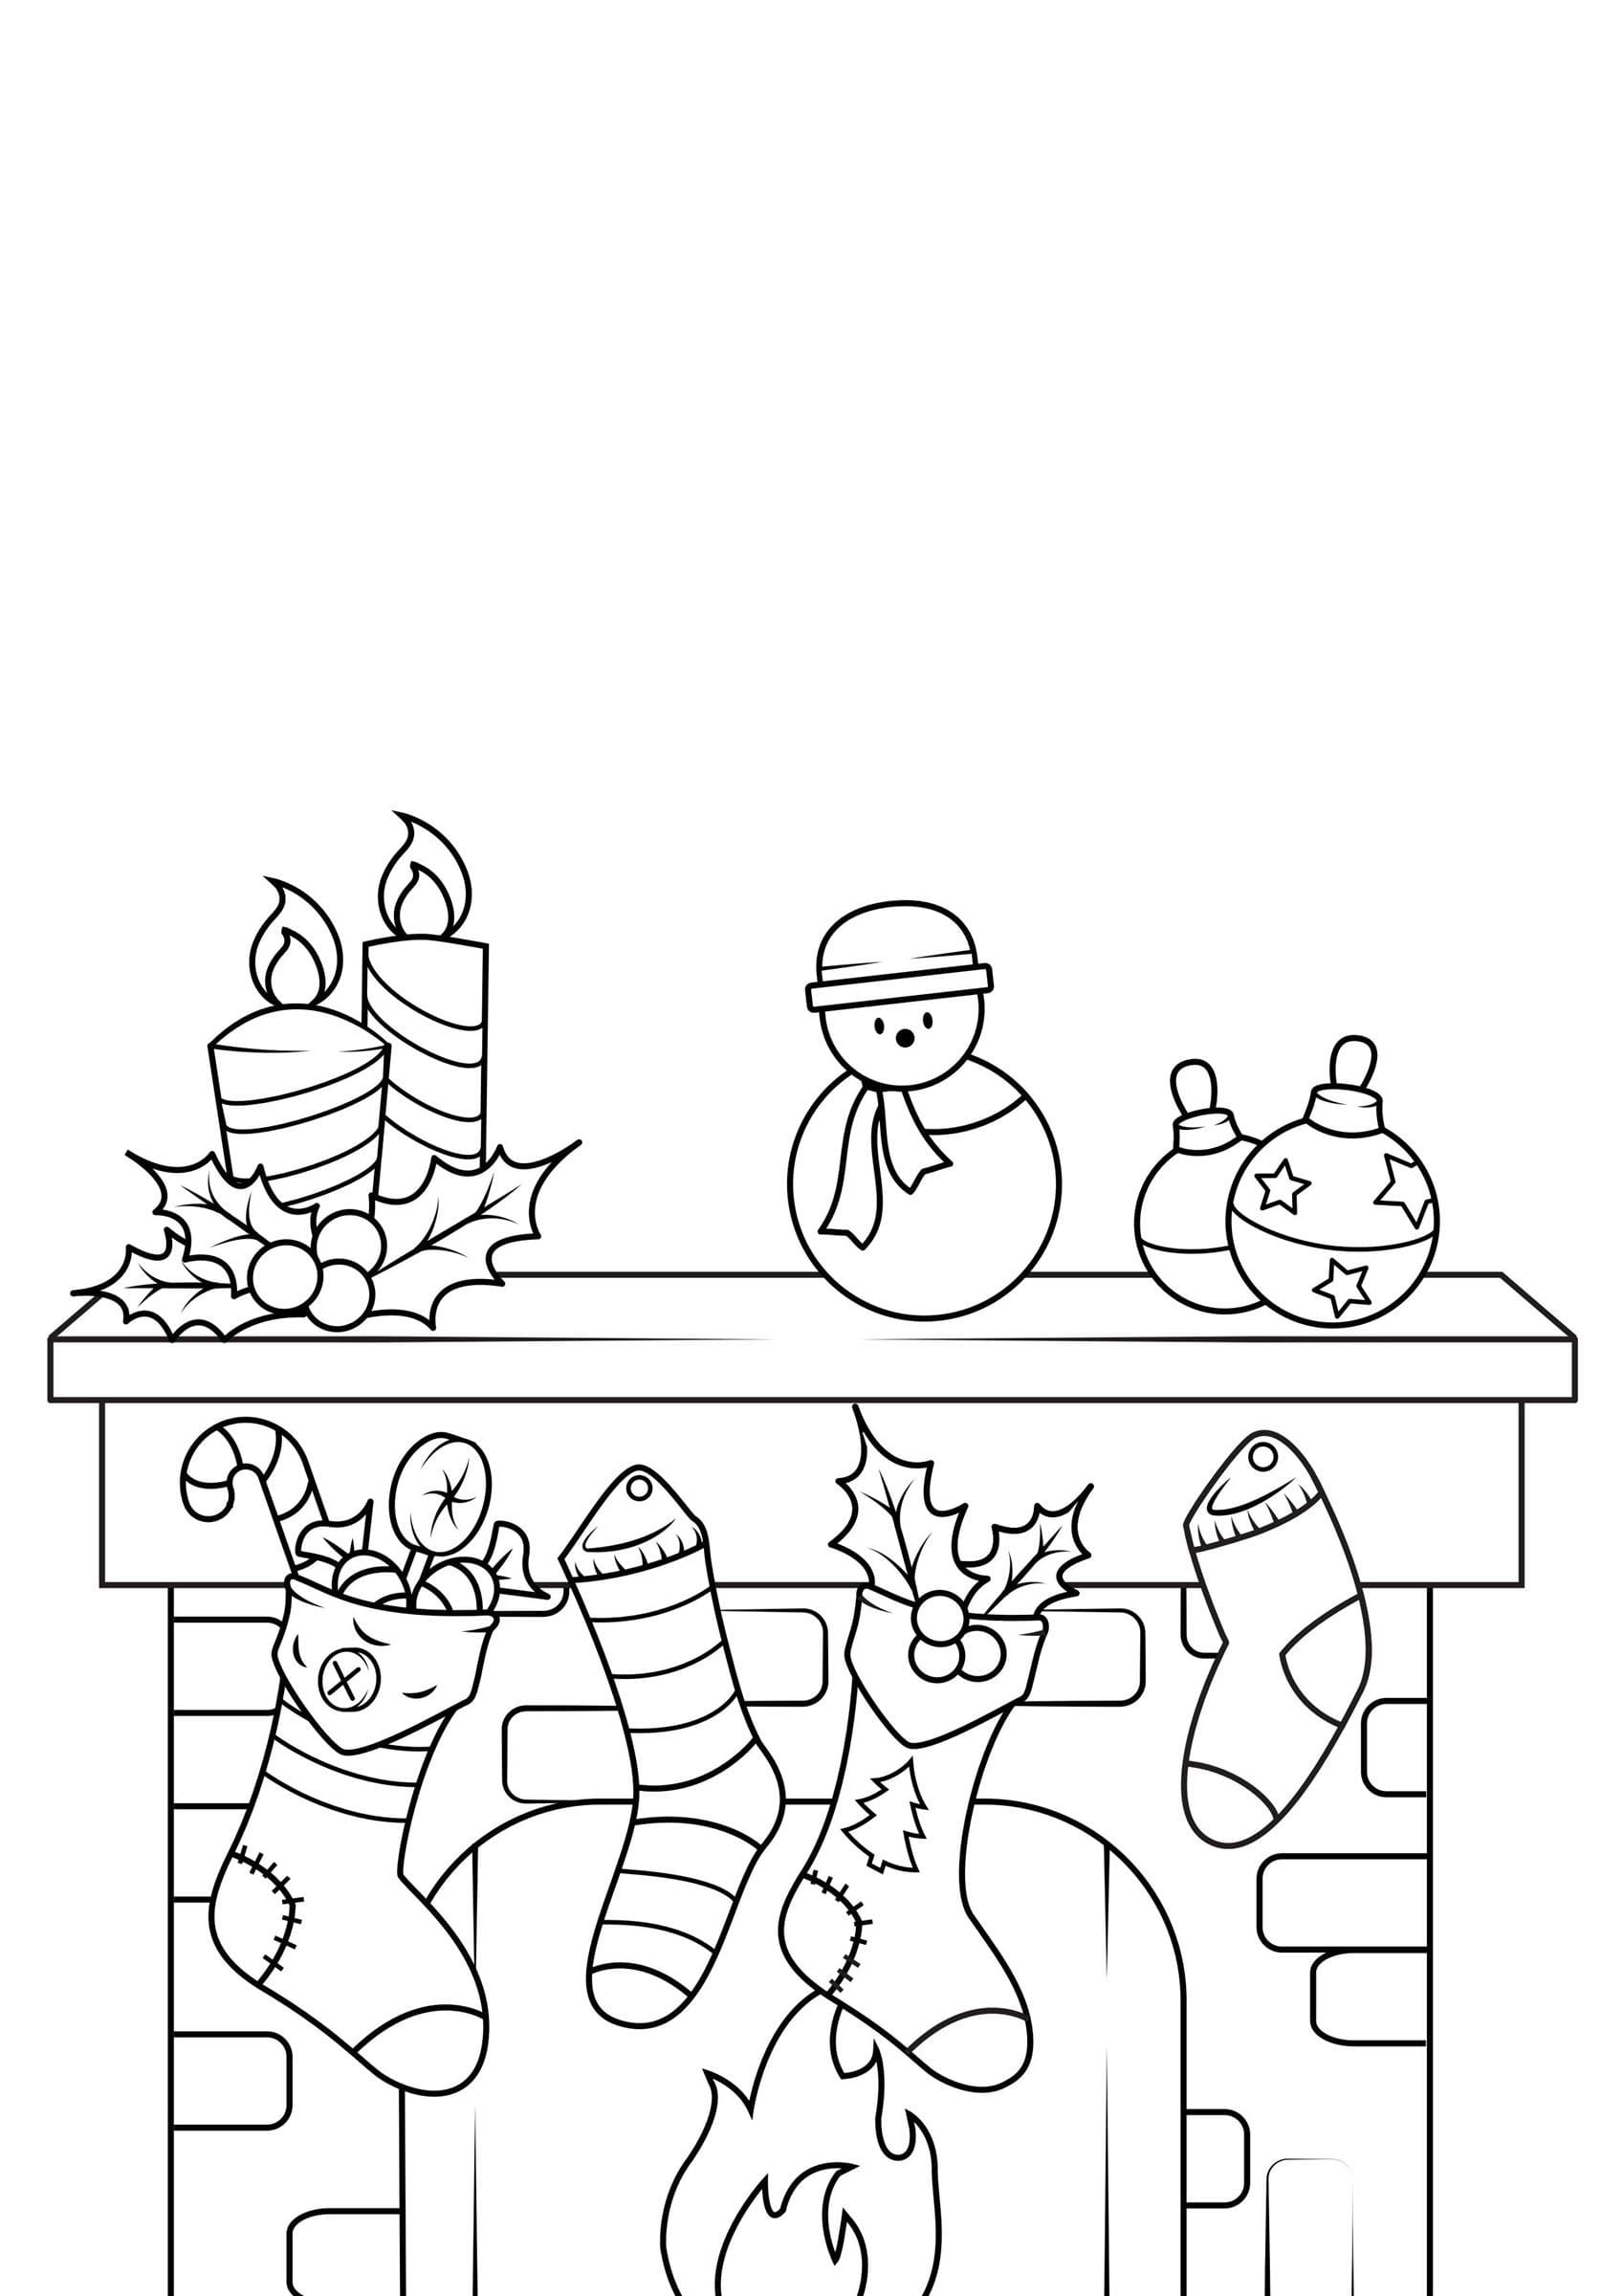 Fireplace With Christmas Attributes Coloring Page